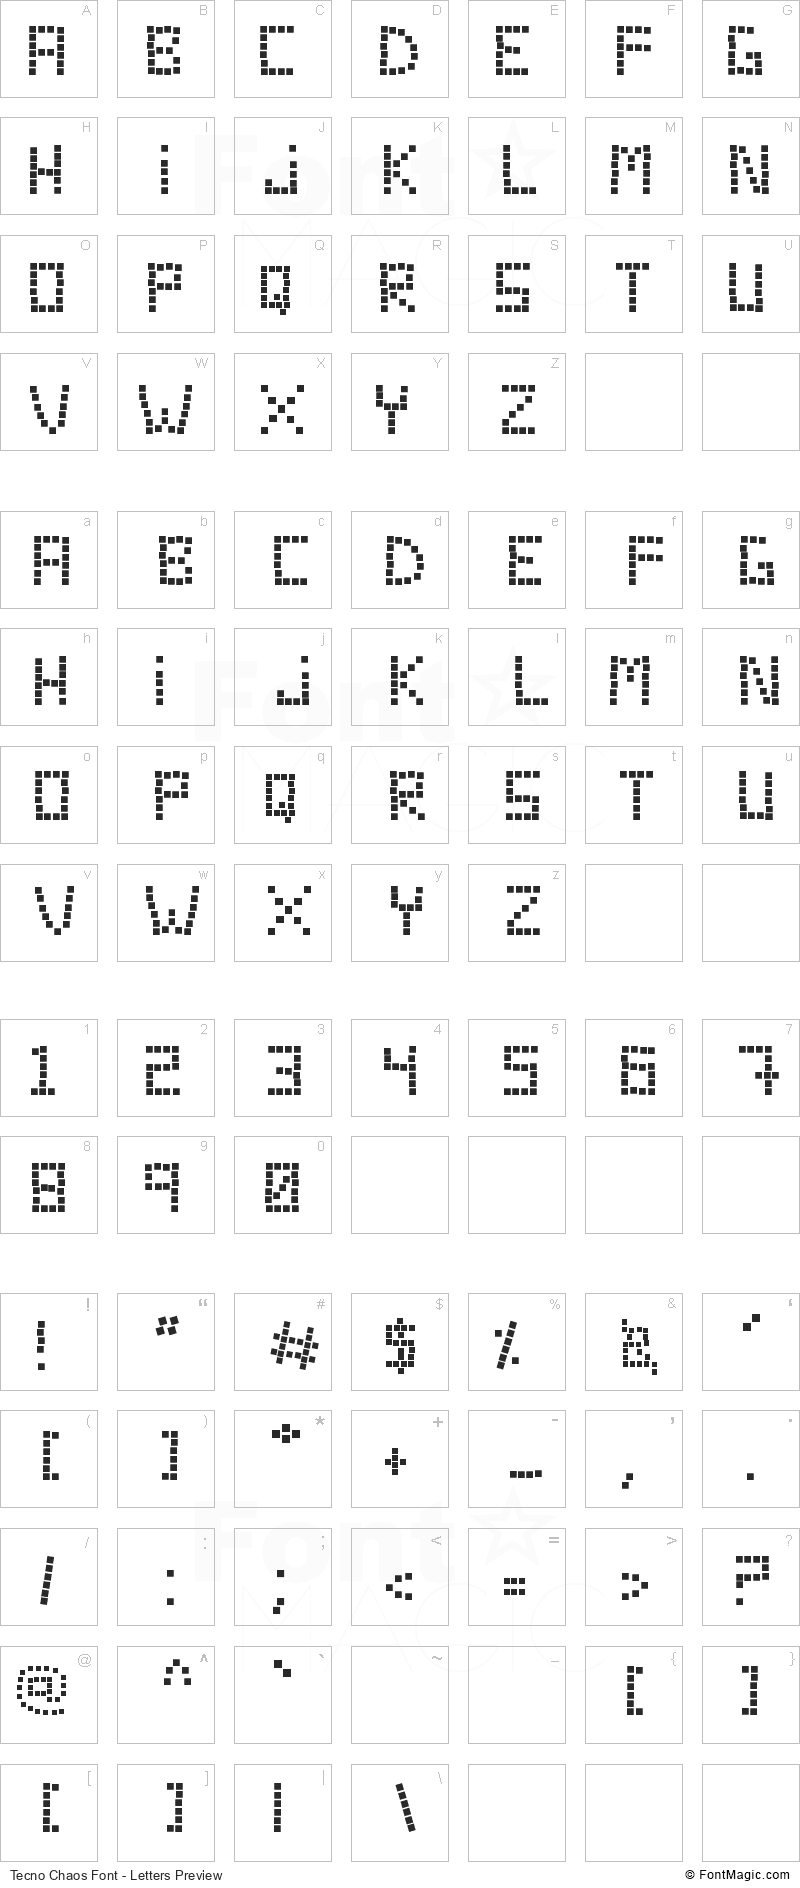 Tecno Chaos Font - All Latters Preview Chart